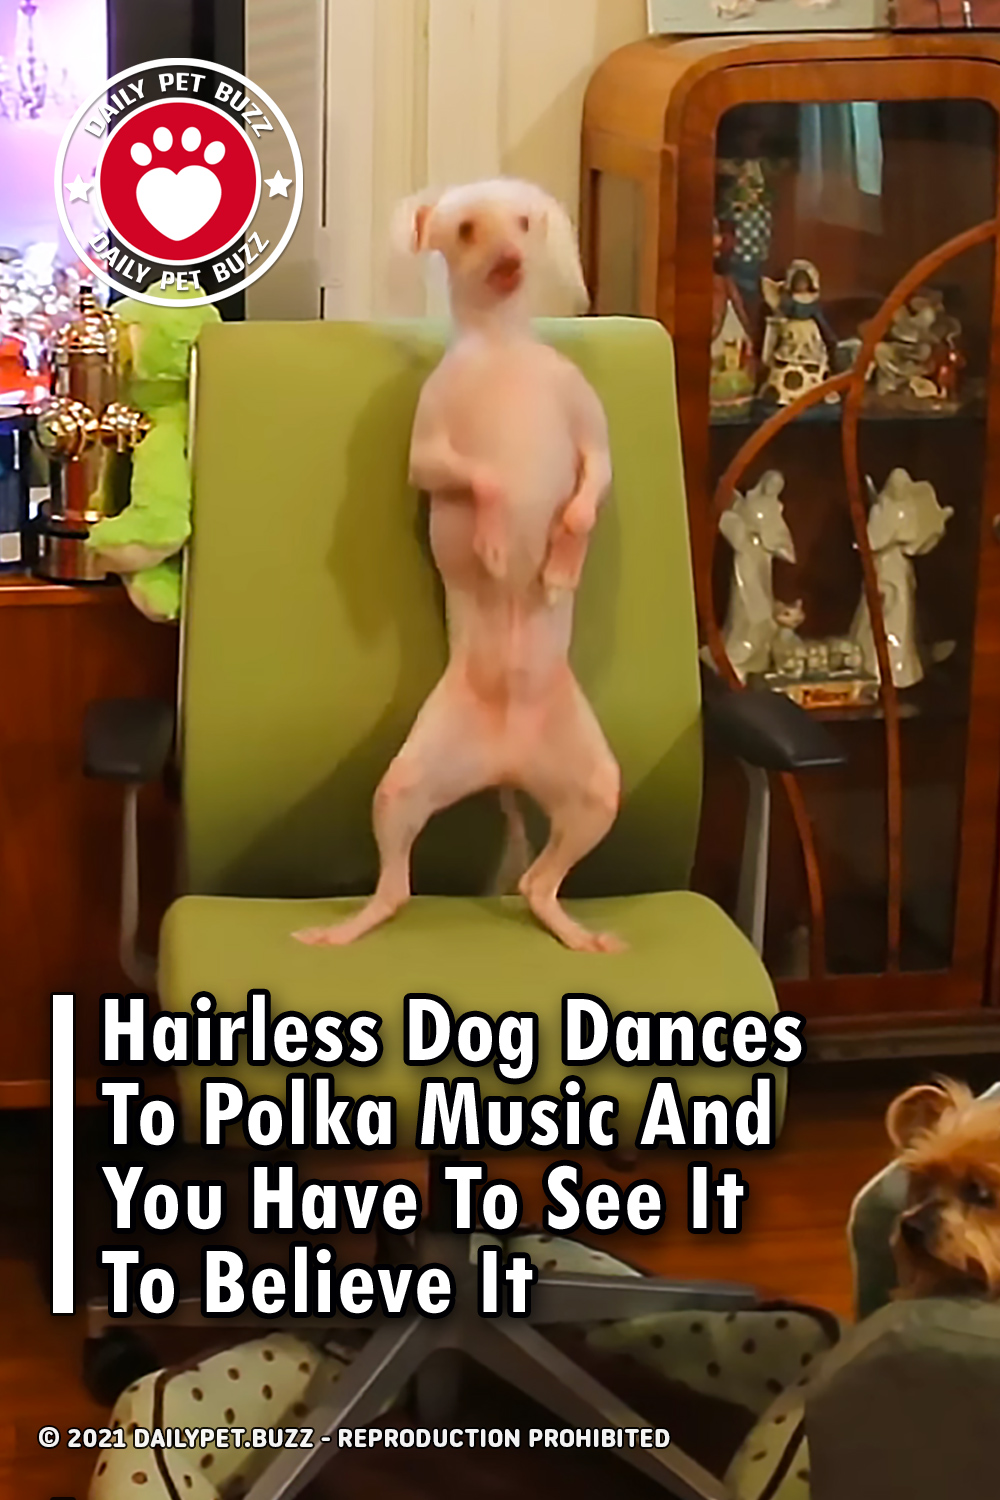 Hairless Dog Dances To Polka Music And You Have To See It To Believe It